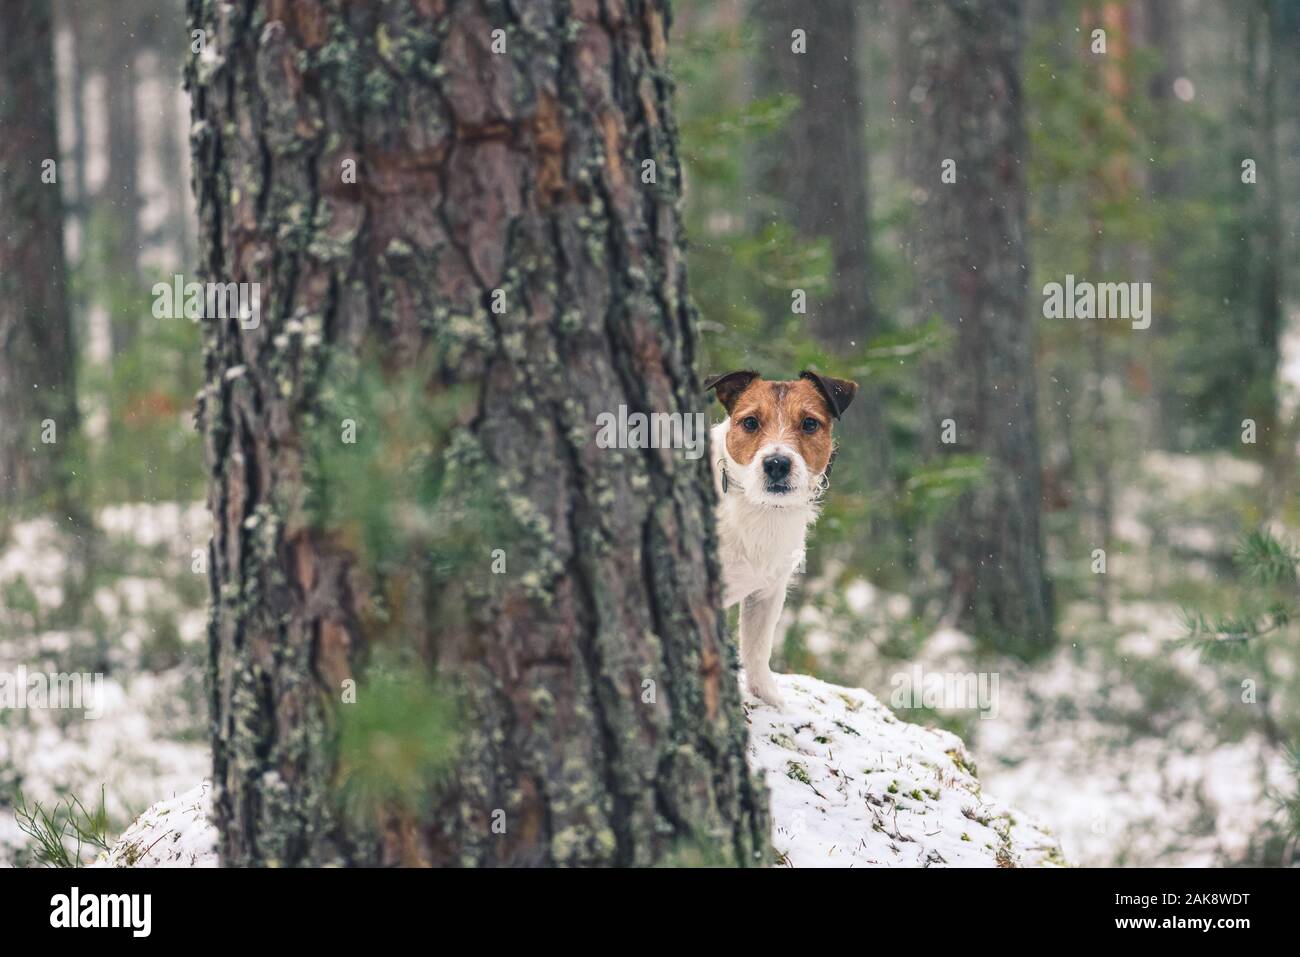 Dog walking in wild nature playing hide-and-seek behind tree Stock Photo